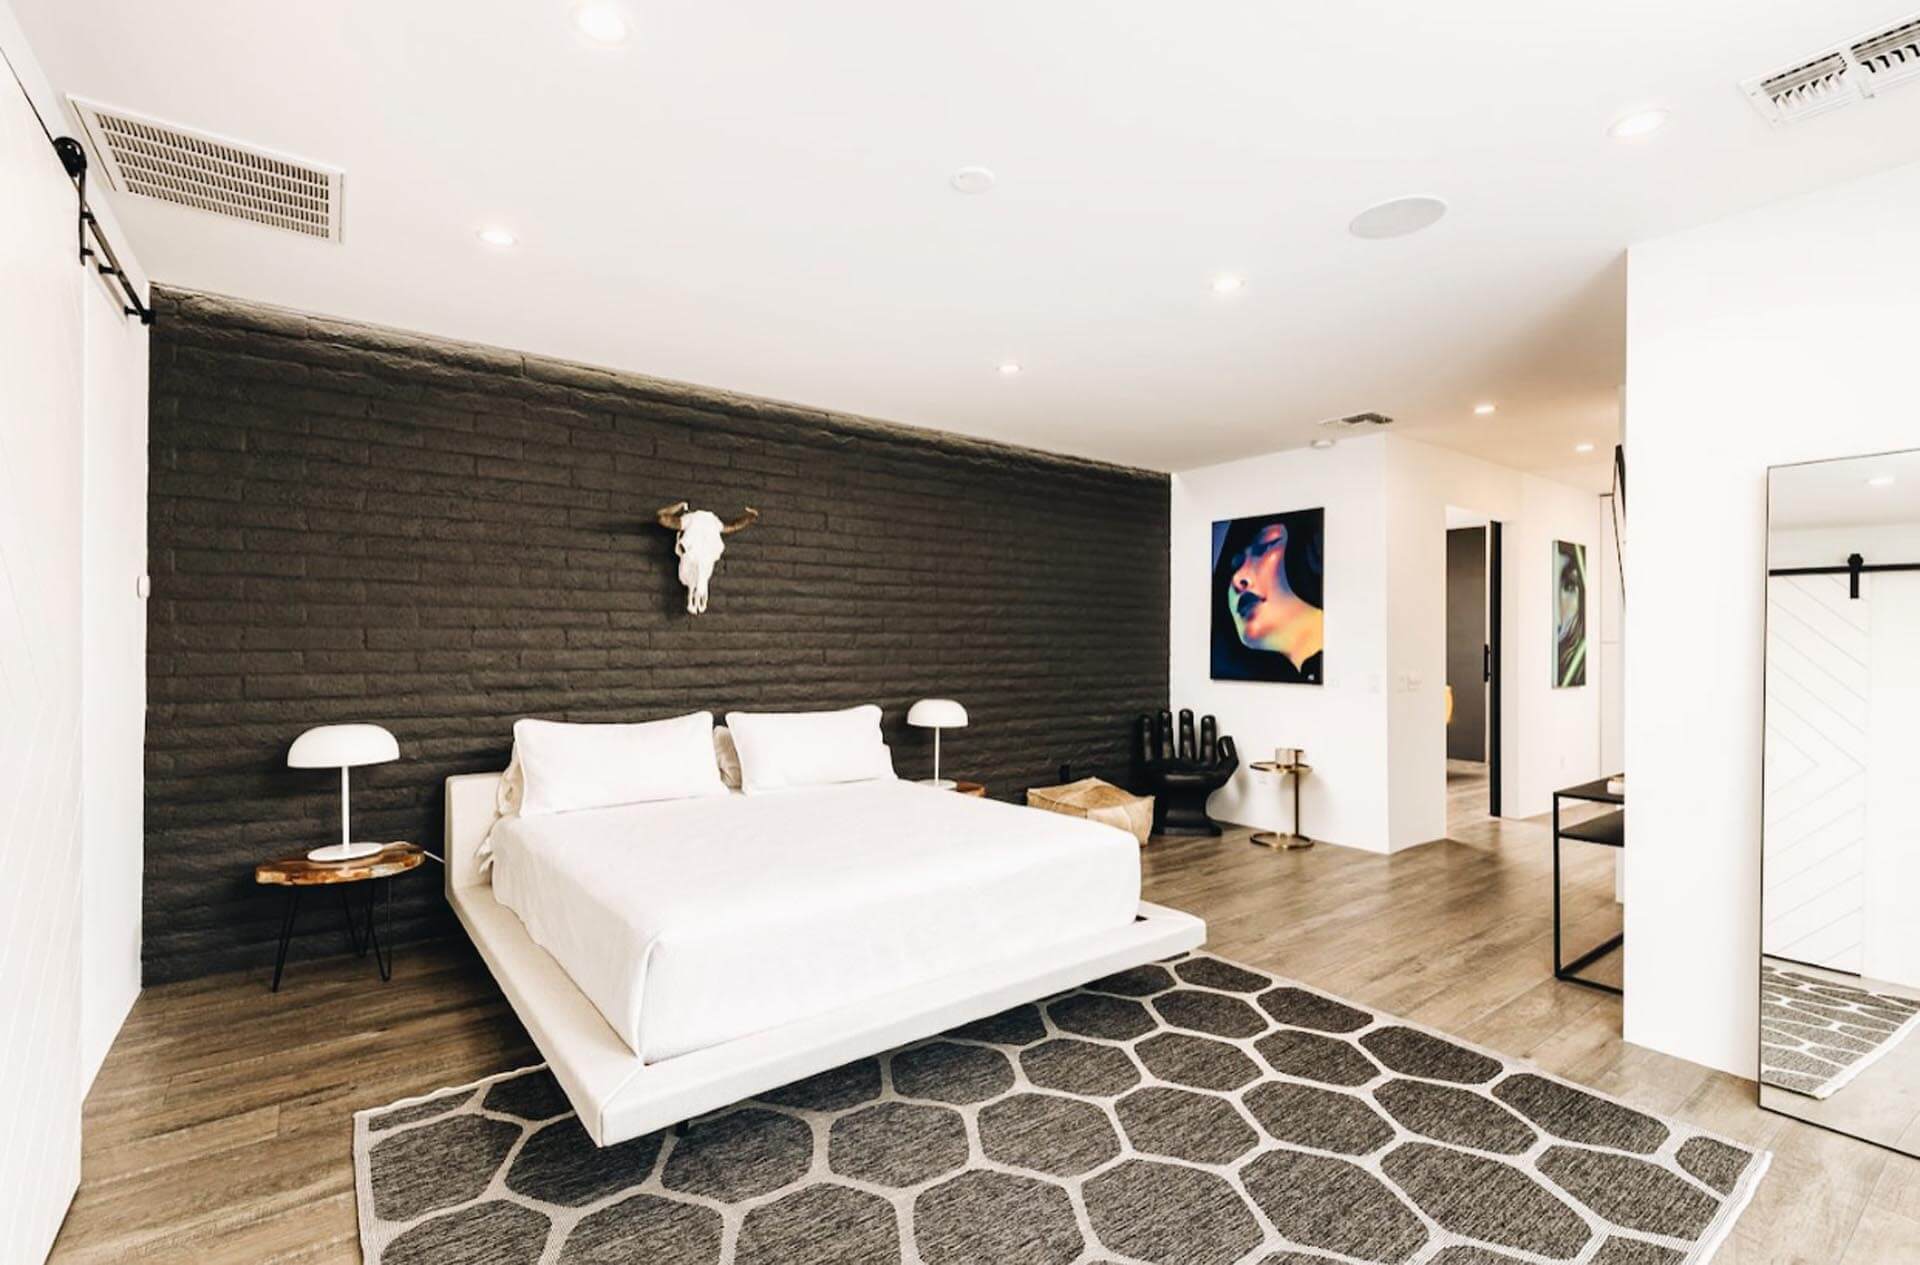 Artfully designed bedroom at the Manor On Camelback, featuring a striking animal skull hanging above and complemented by captivating modern art, offering a unique and stylish ambiance in Phoenix